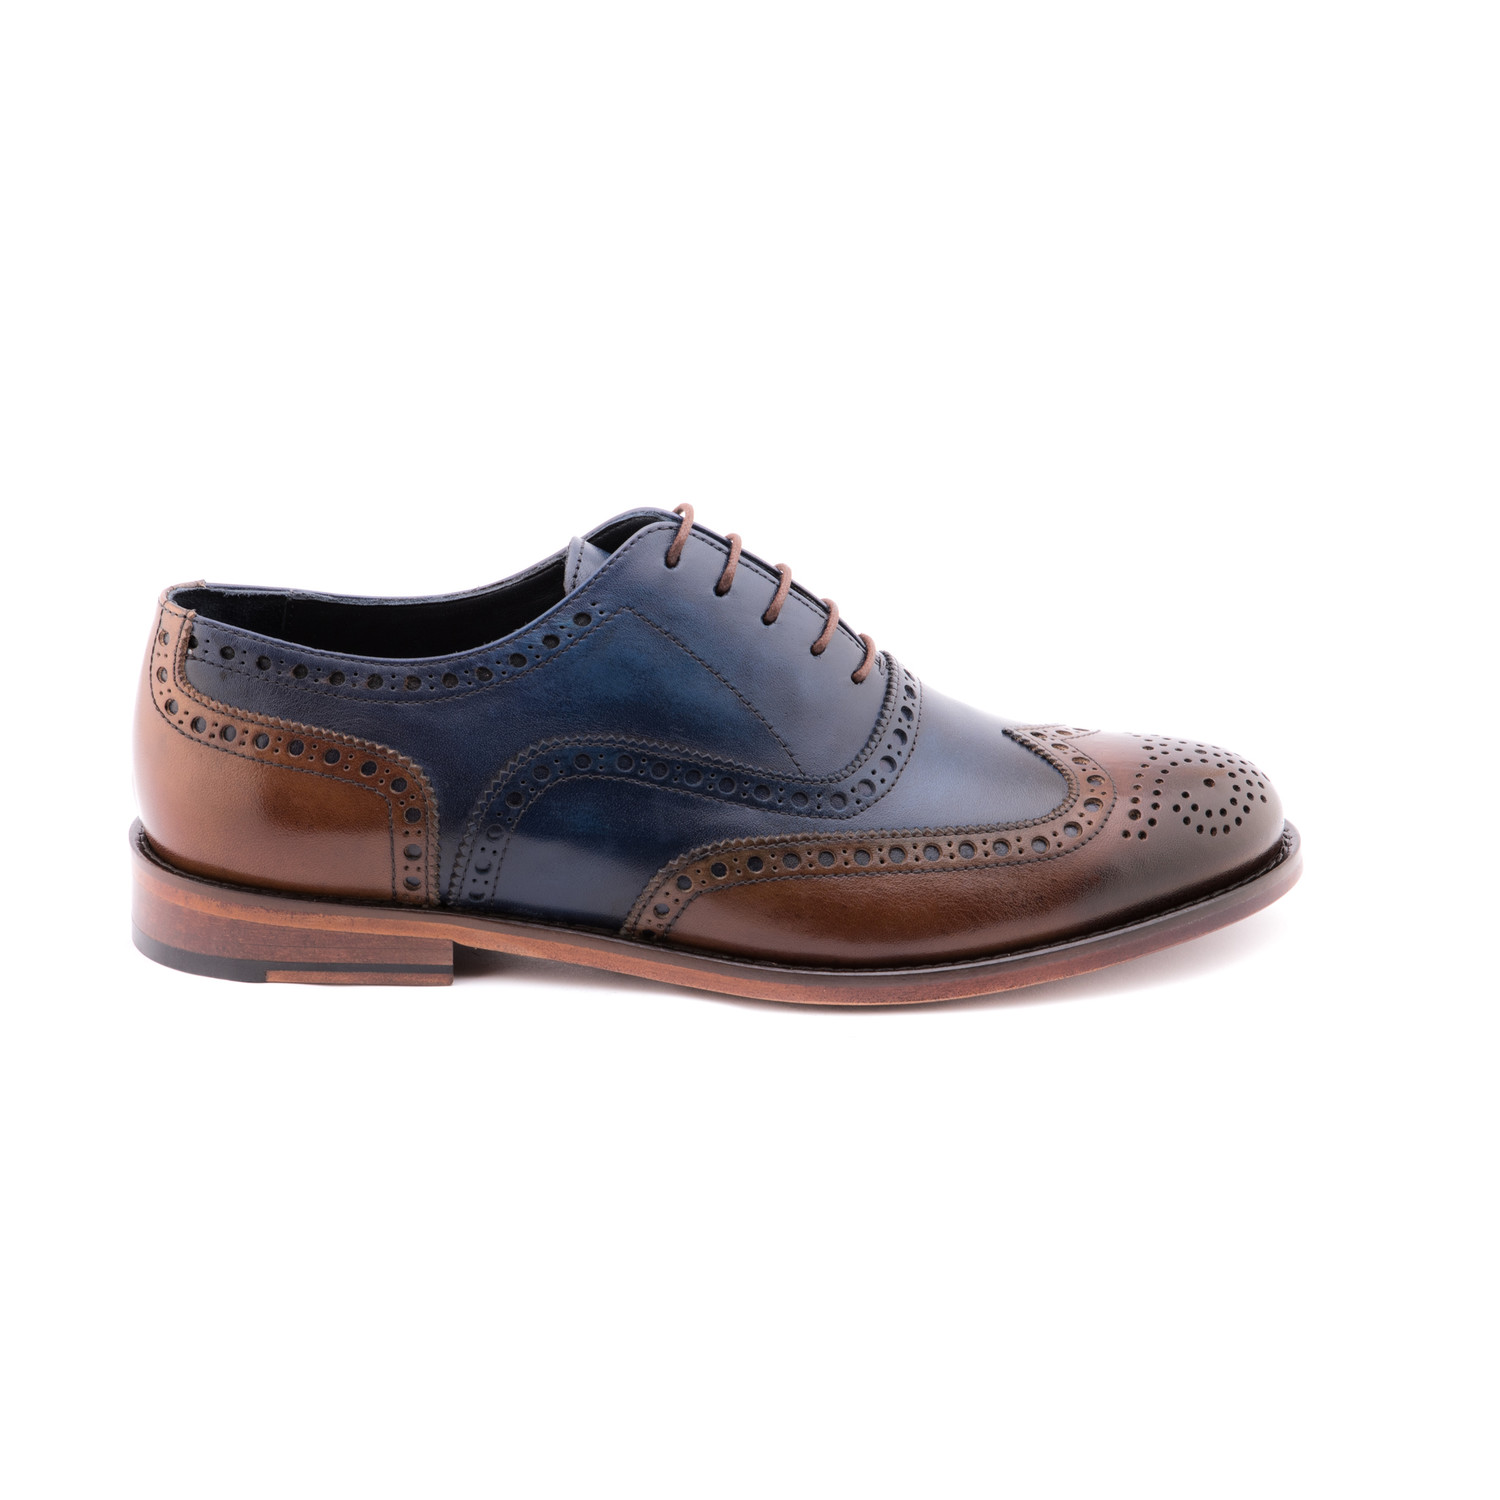 Wing-Tip Oxford // Navy + Blue (Euro: 40) - Jared Lang - Touch of Modern